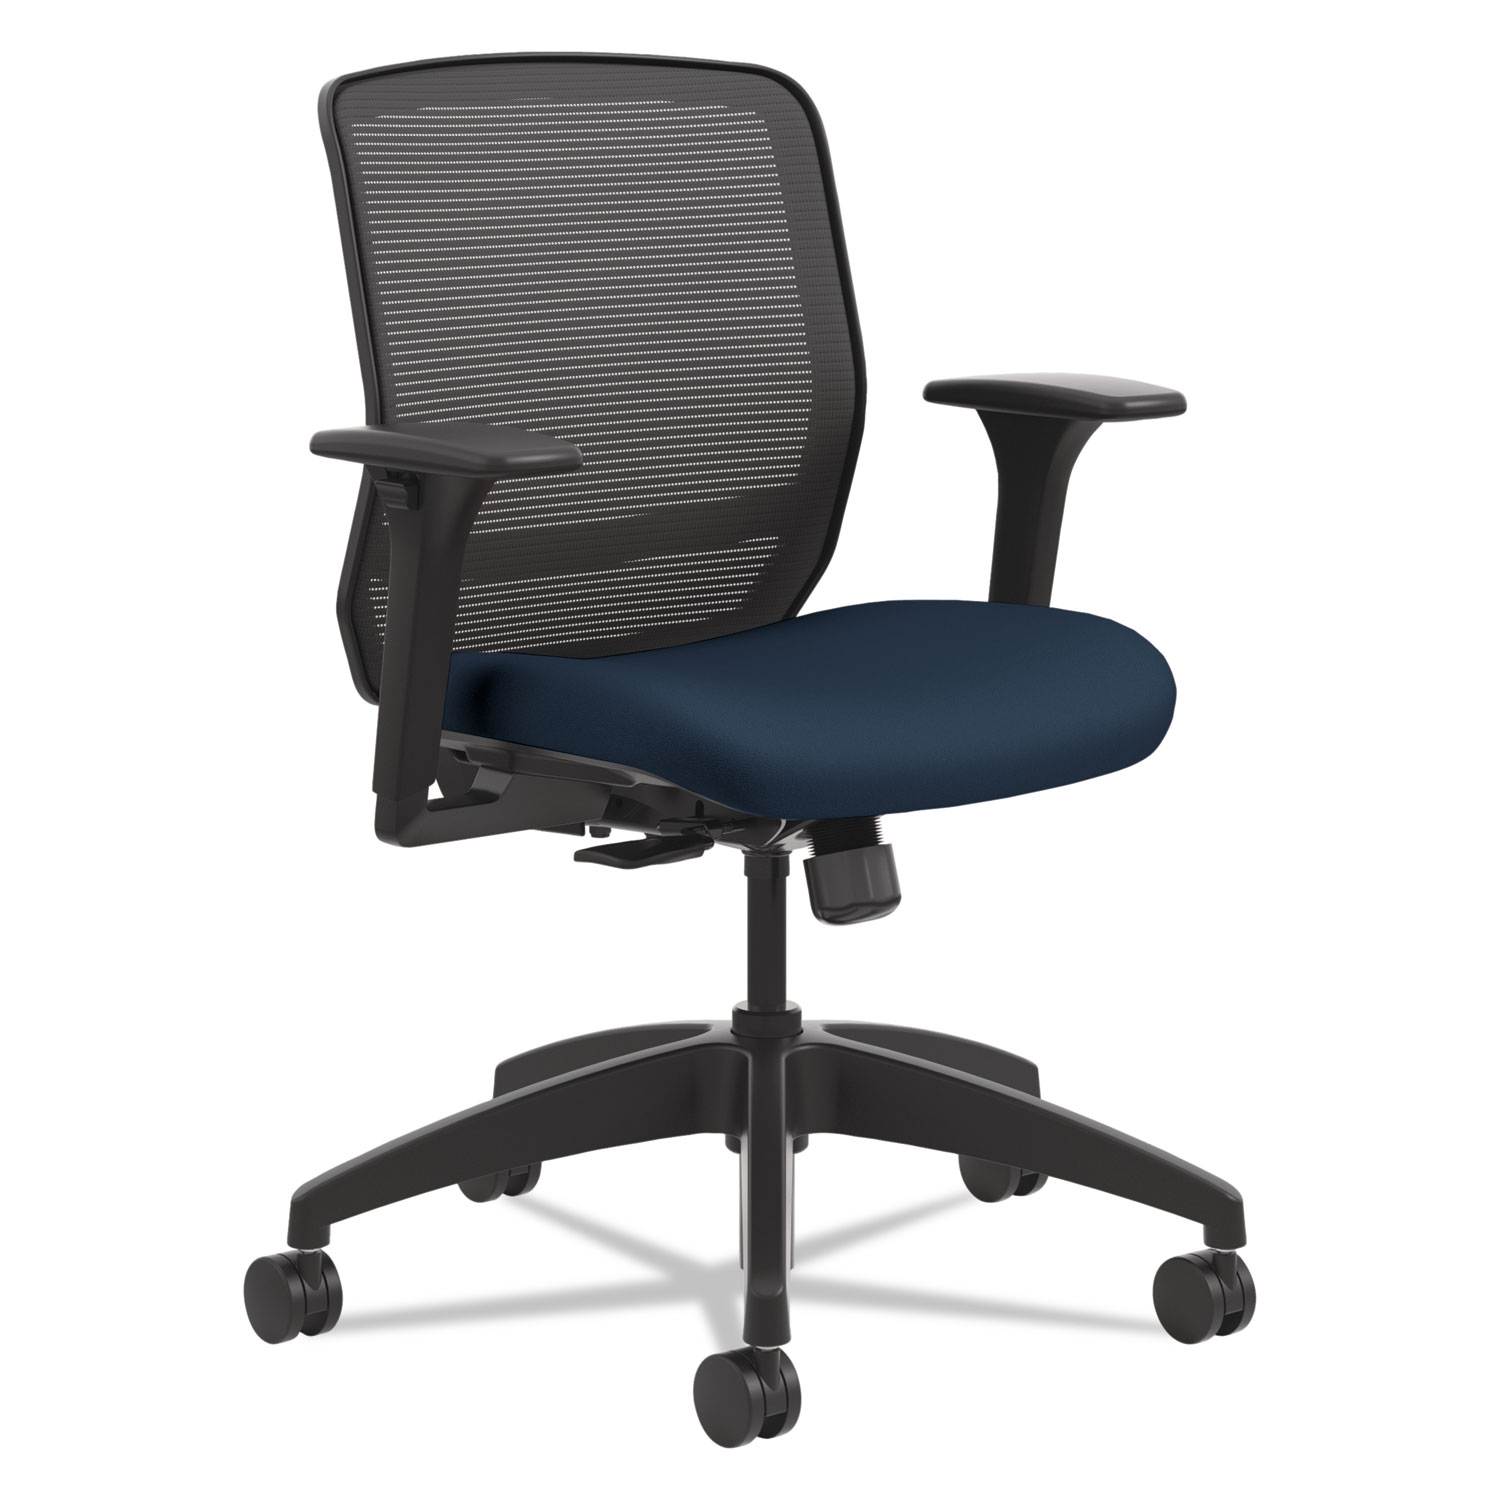  HON HQTMM.Y0.A.H.IM.CU98.SB Quotient Series Mesh Mid-Back Task Chair, Supports up to 300 lbs., Navy Seat/Black Back, Black Base (HONQTMMY1ACU98) 